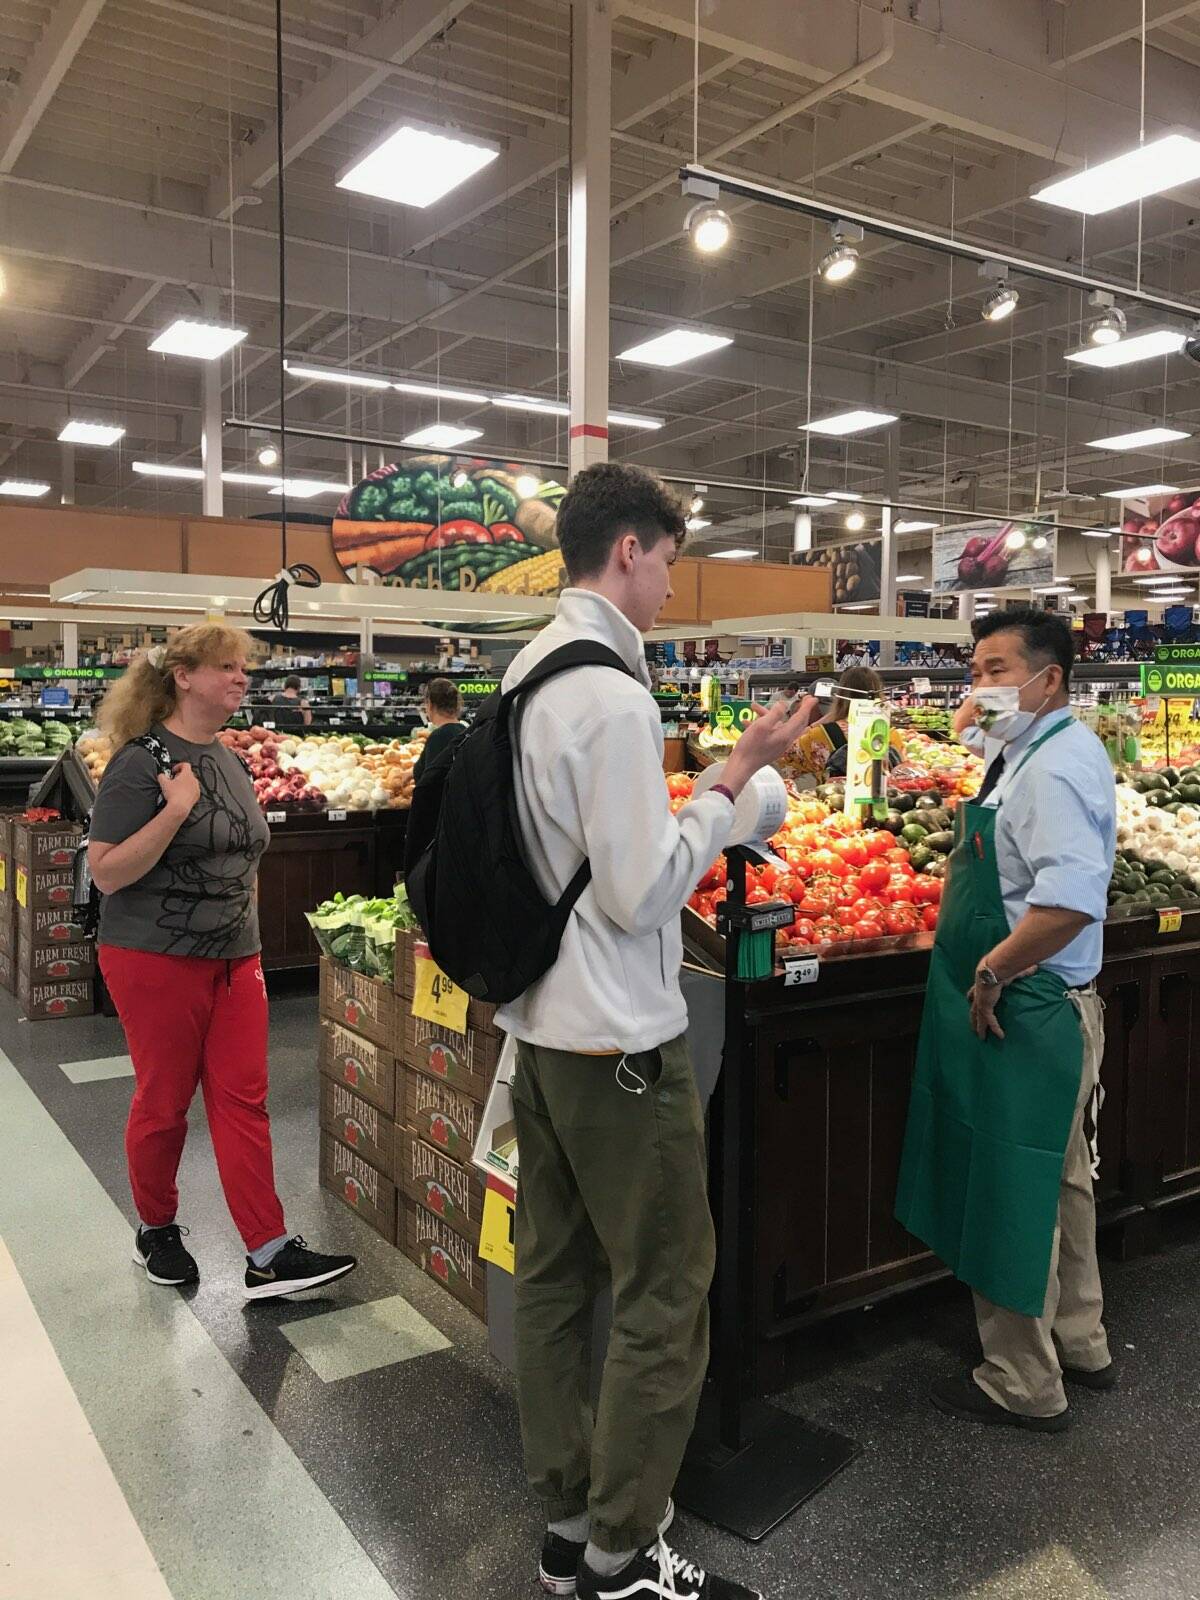 Iryna Hrynchenko and her 18 year old son Ivan, the first refugees from the war in Ukraine to arrive in Juneau, shop for produce at Fred Meyer while talking with an employee who arrived here as a refugee from Vietnam many years ago. (Courtesy Photo / Joyanne Bloom)